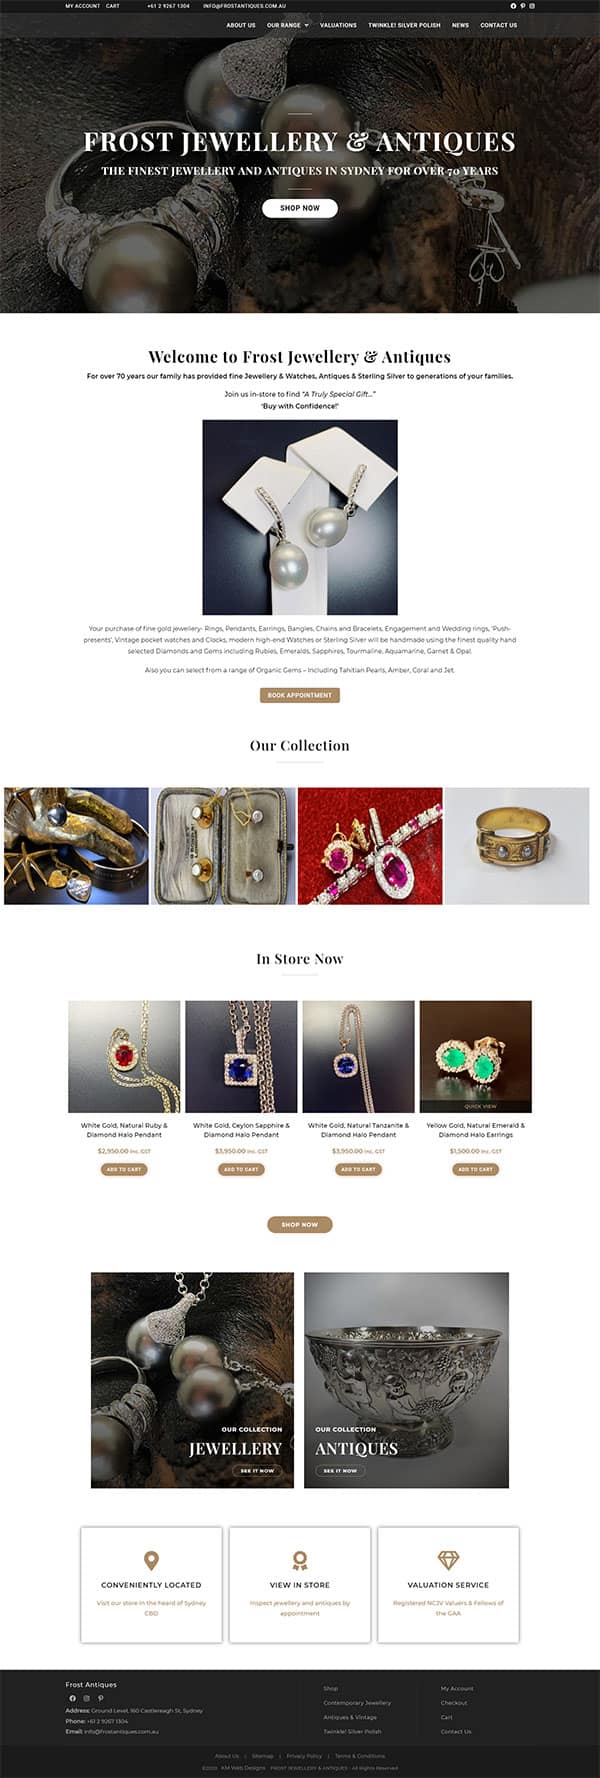 Frost Jewellery & Antiques Home Page